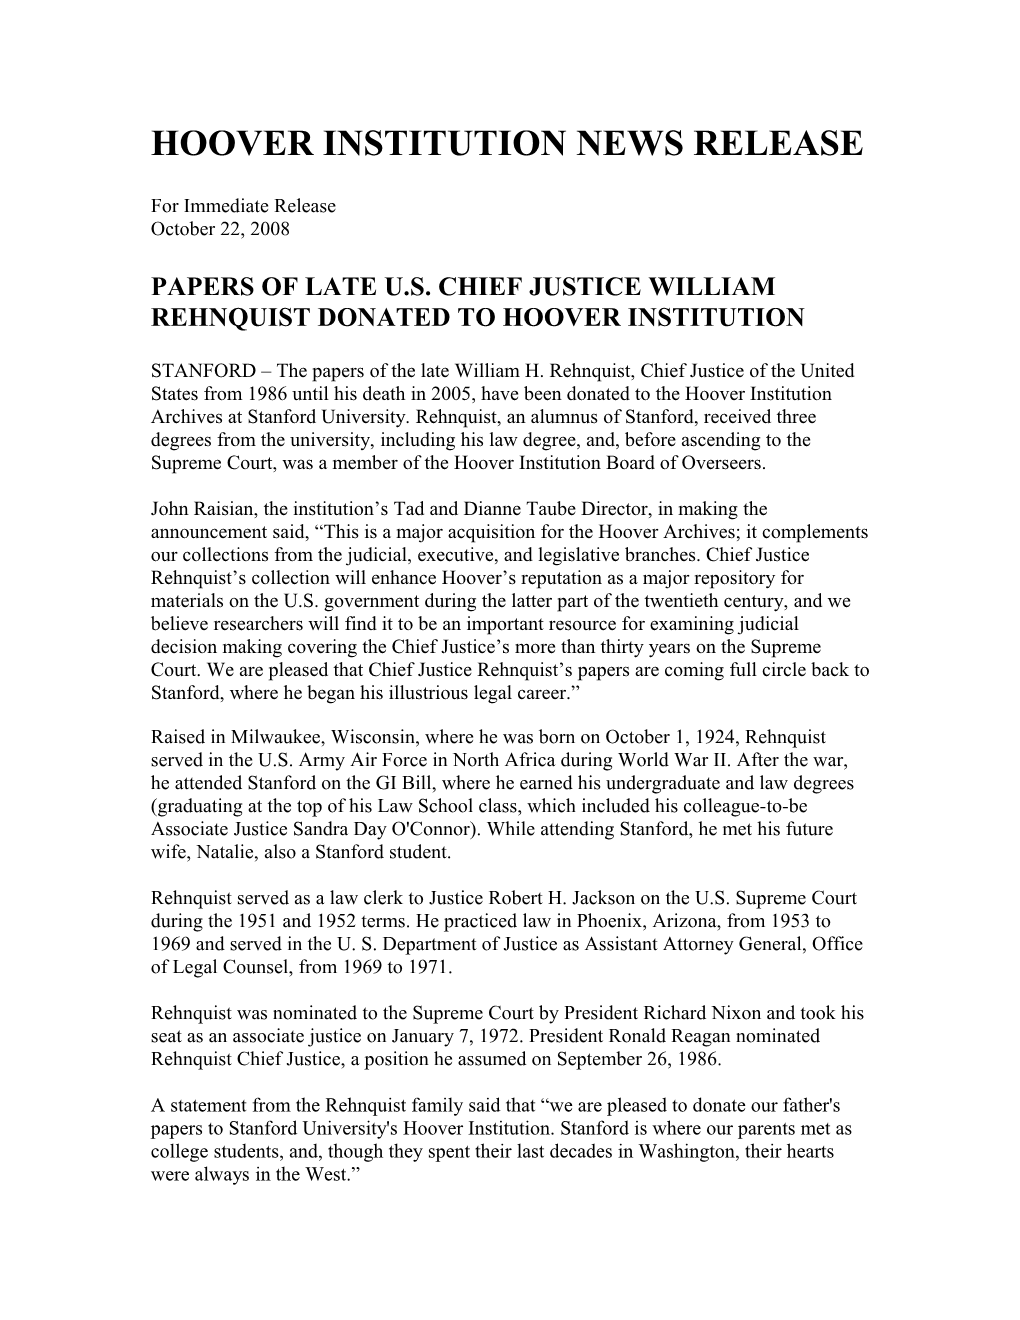 Hoover Institution News Release